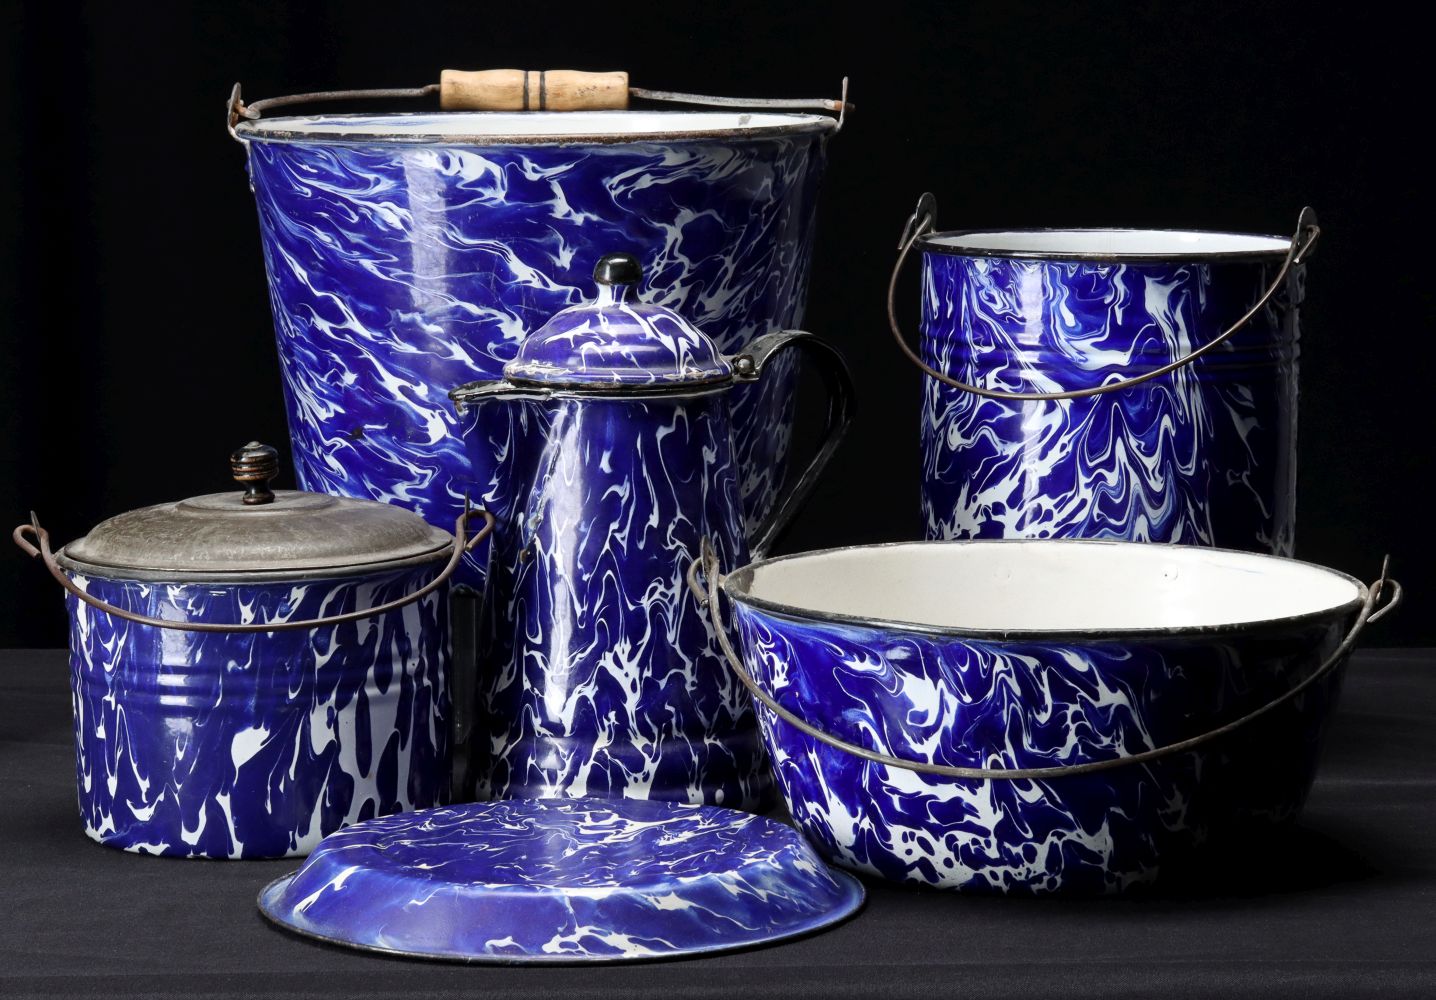 A NICE COLLECTION OF GOOD BLUE SWIRL GRANITEWARE